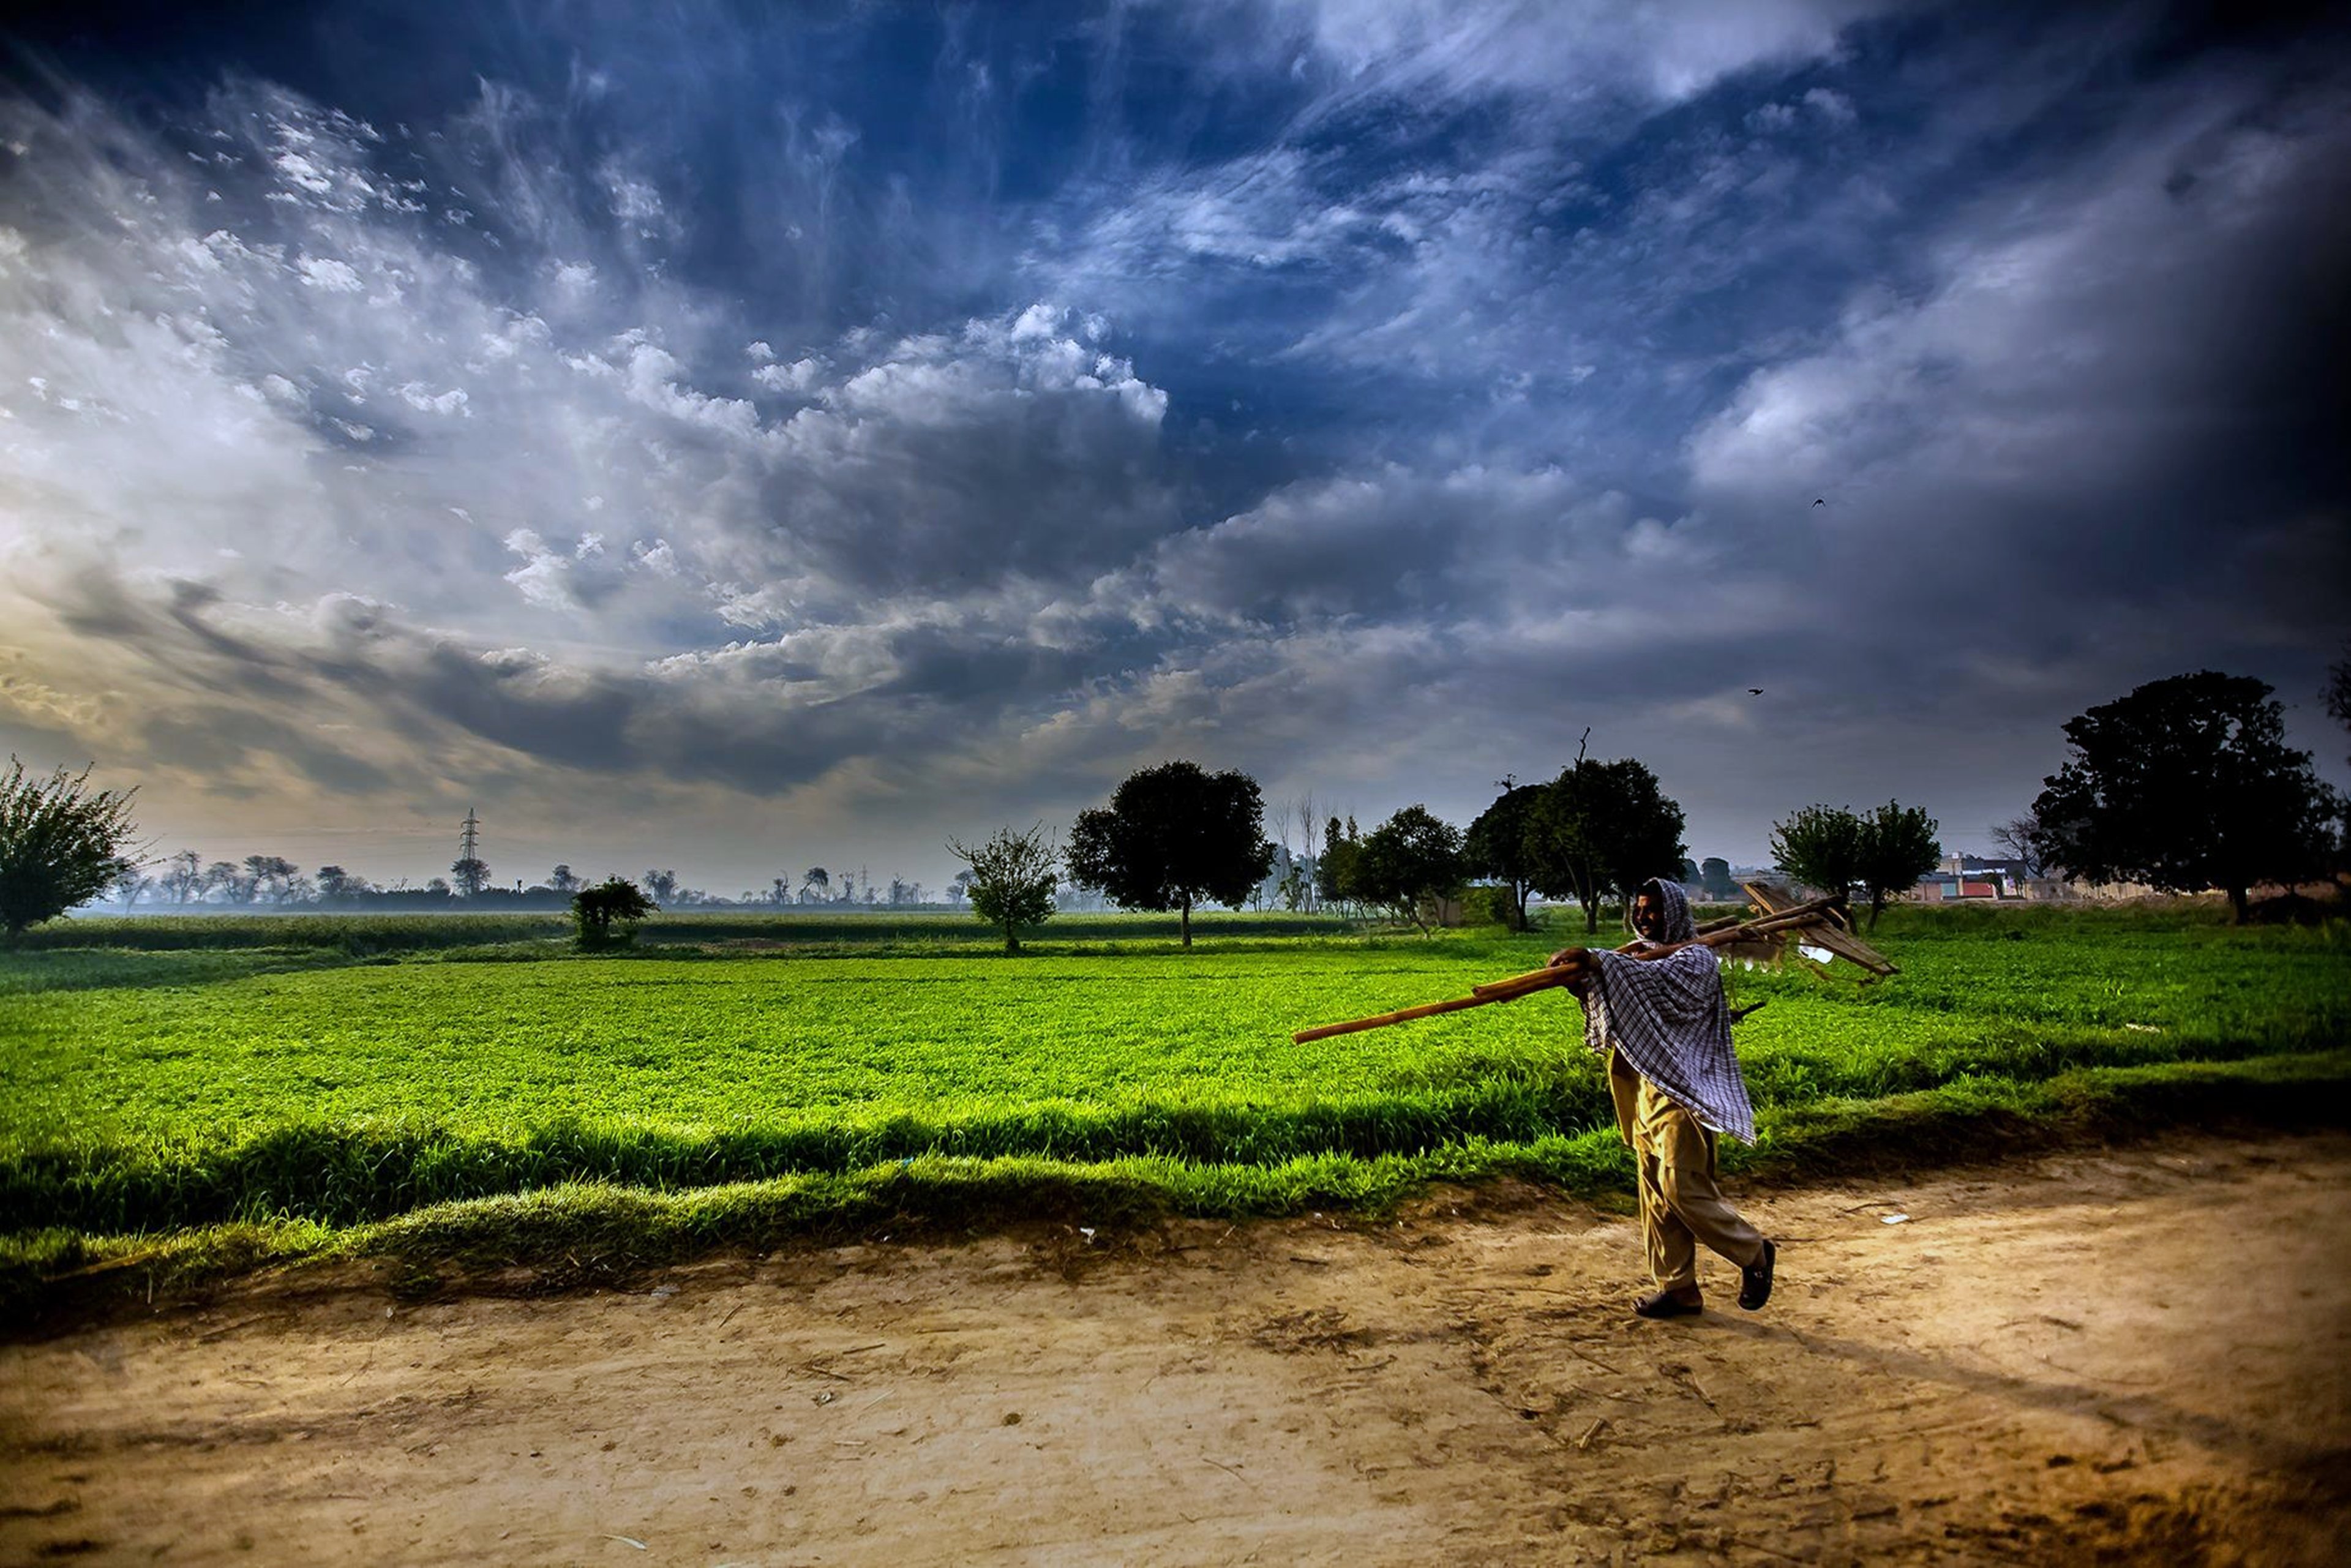 642734 Pakistan Landscapes Man Farmer Agriculture Clouds Sky Trees Fog Nature Countryside Grass 1 